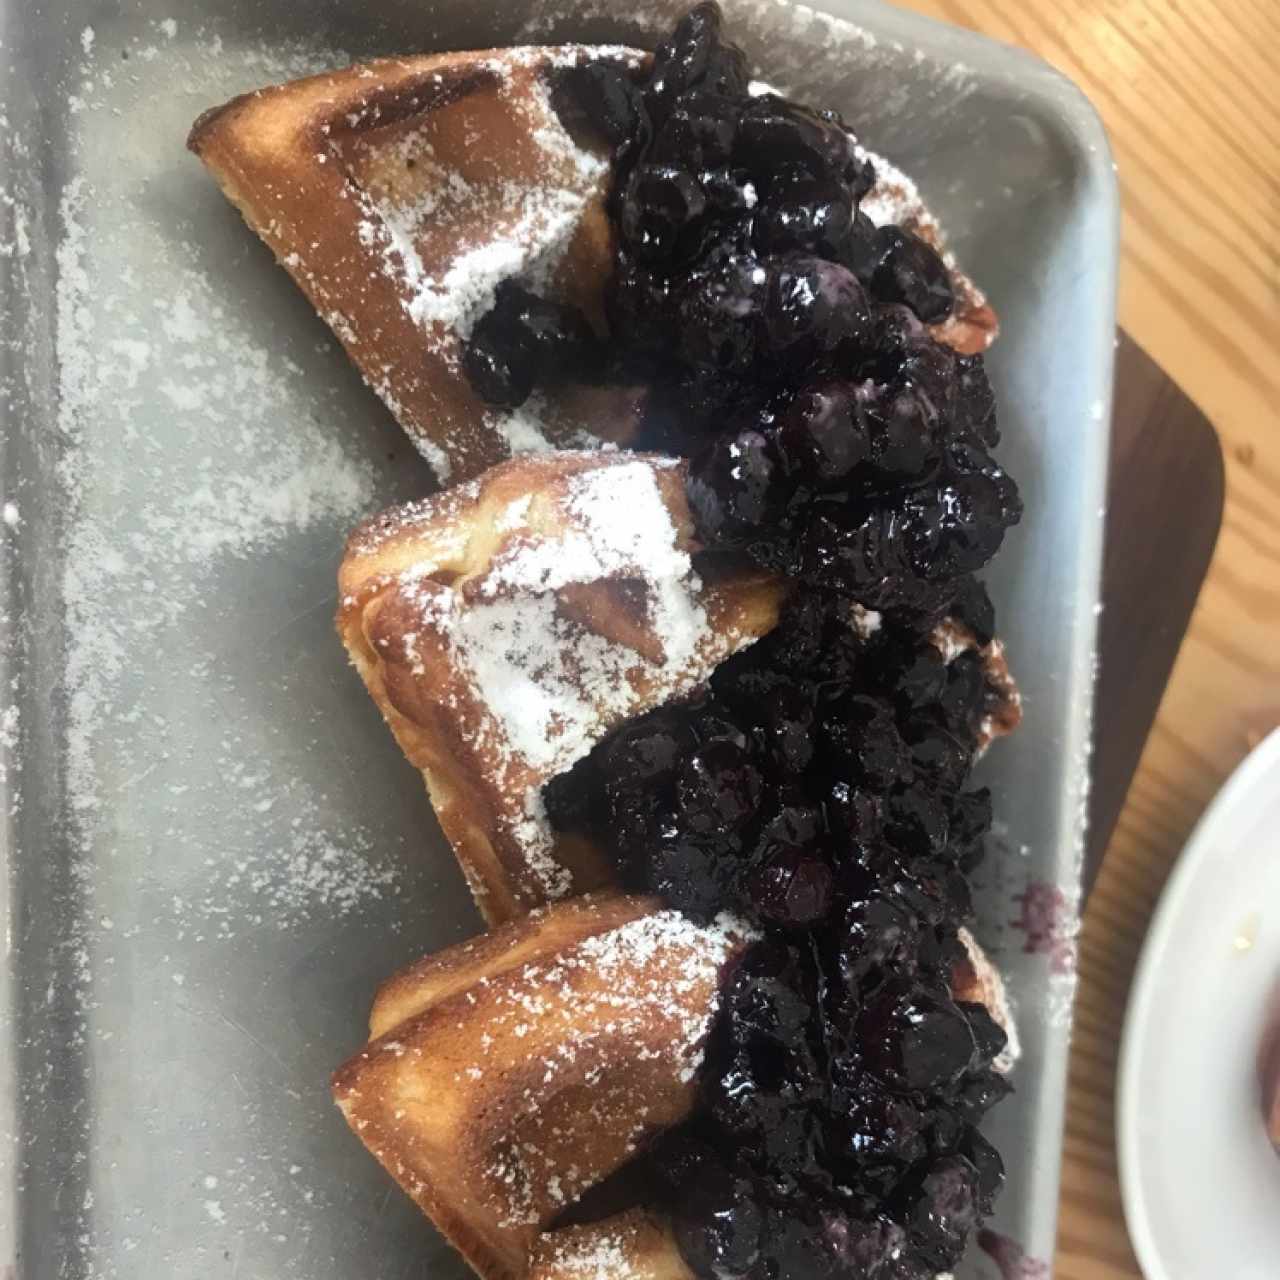 Waffles con blueberries